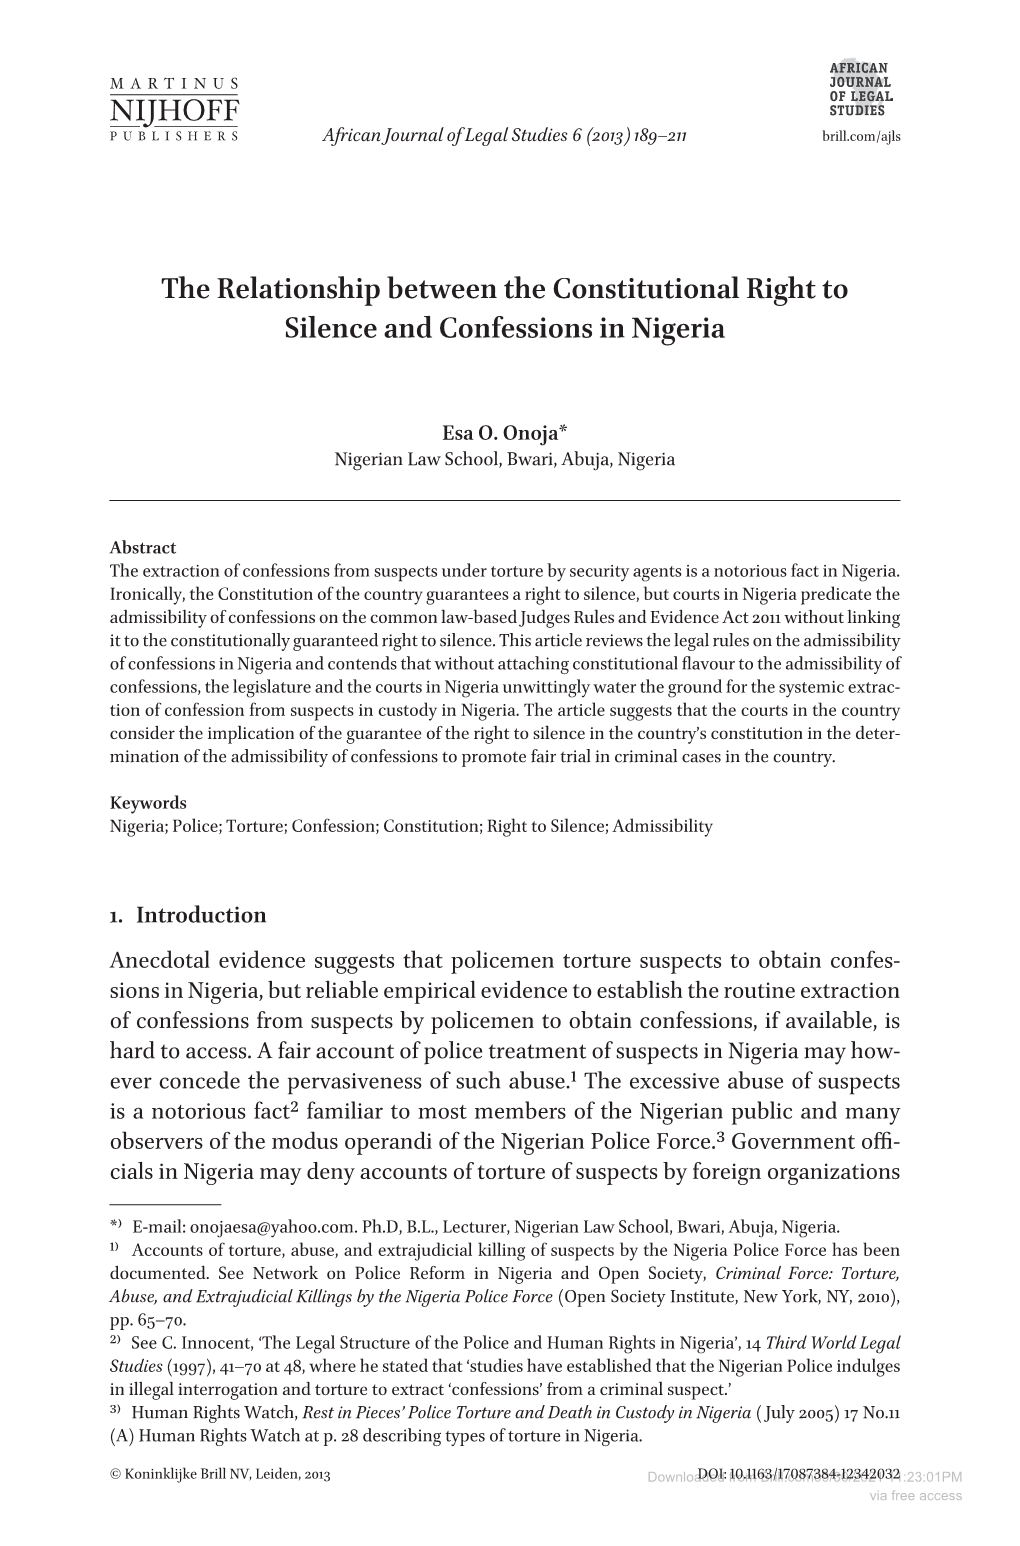 The Relationship Between the Constitutional Right to Silence and Confessions in Nigeria